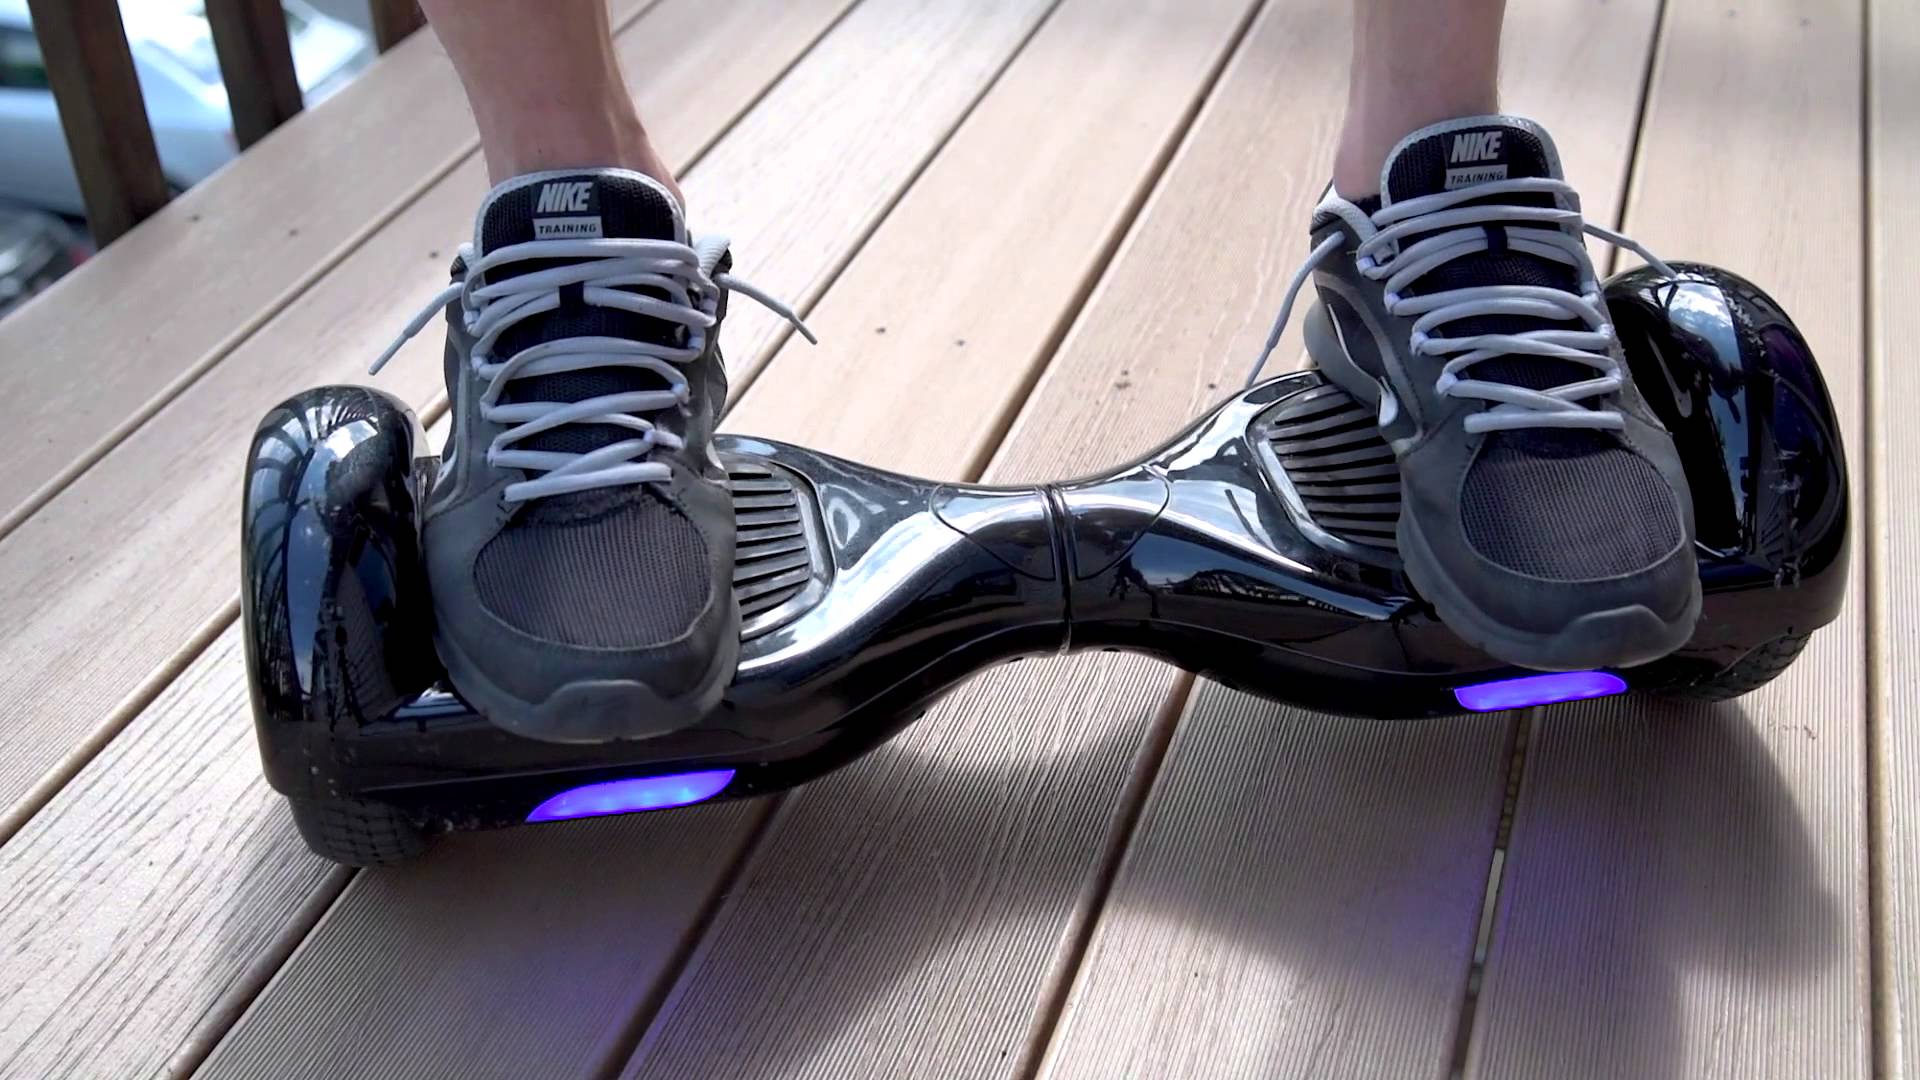 hoverboards in uk banned